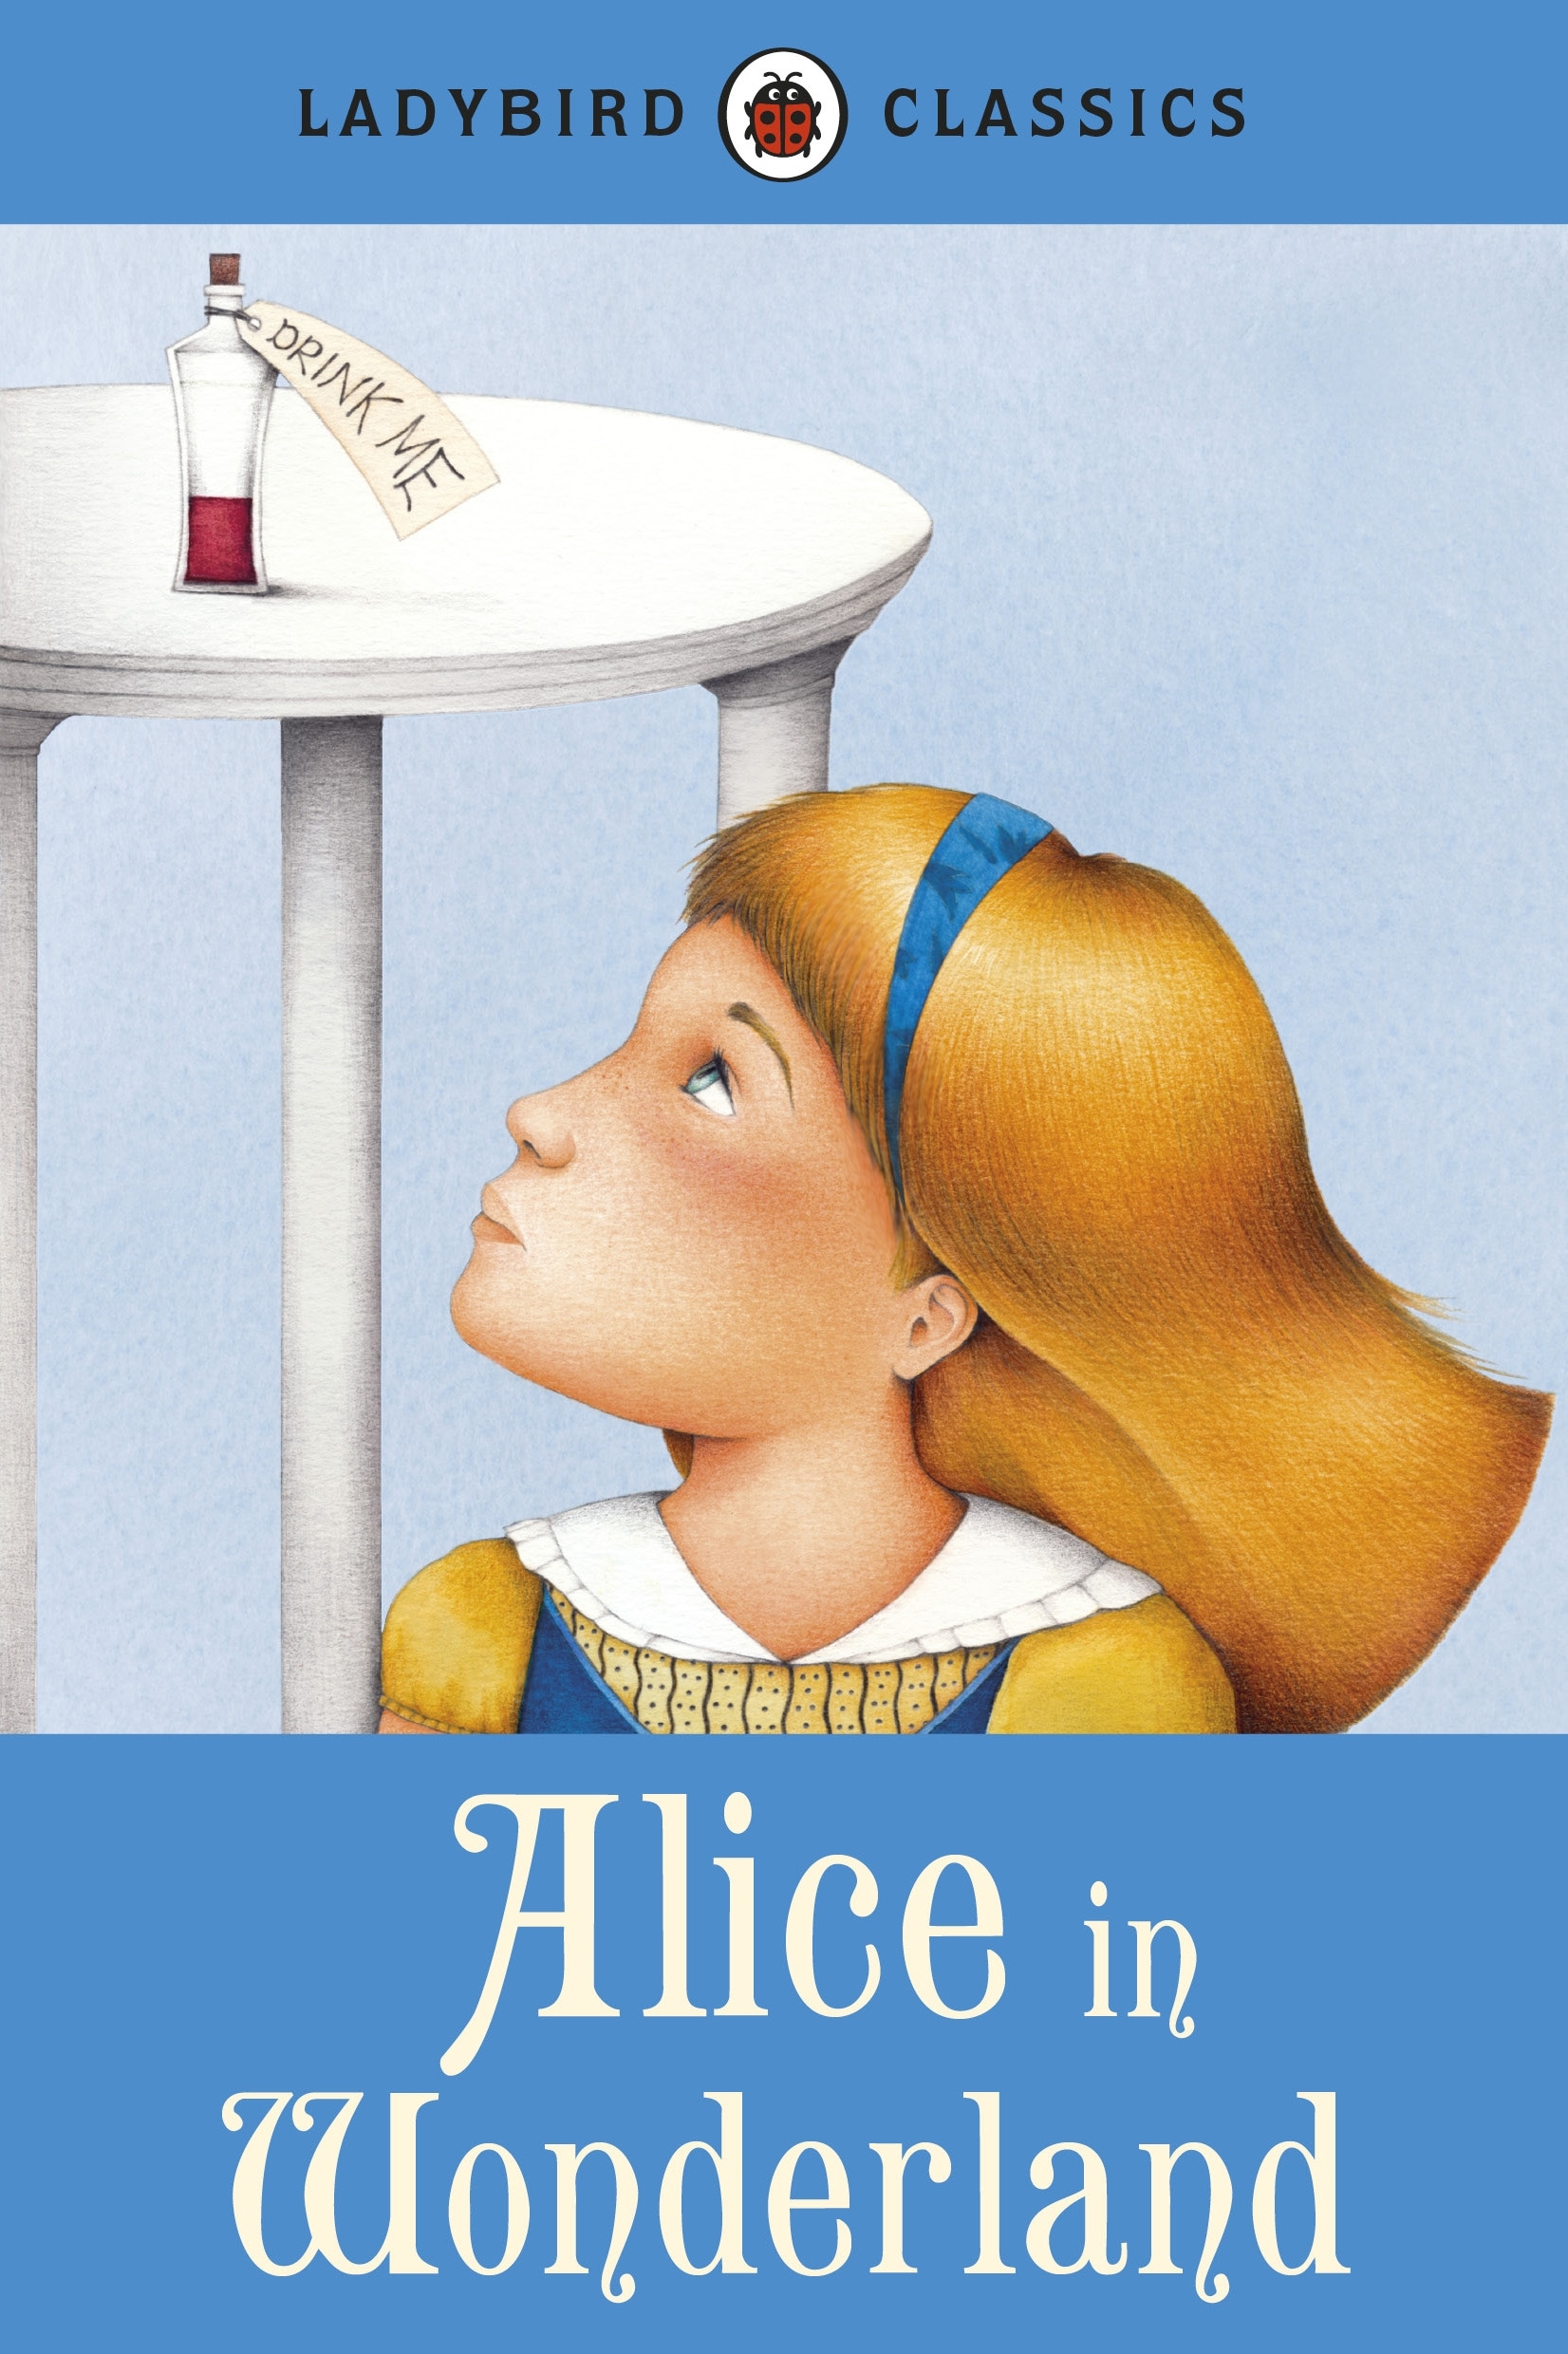 Book “Ladybird Classics: Alice in Wonderland” by Lewis Carroll — July 5, 2012